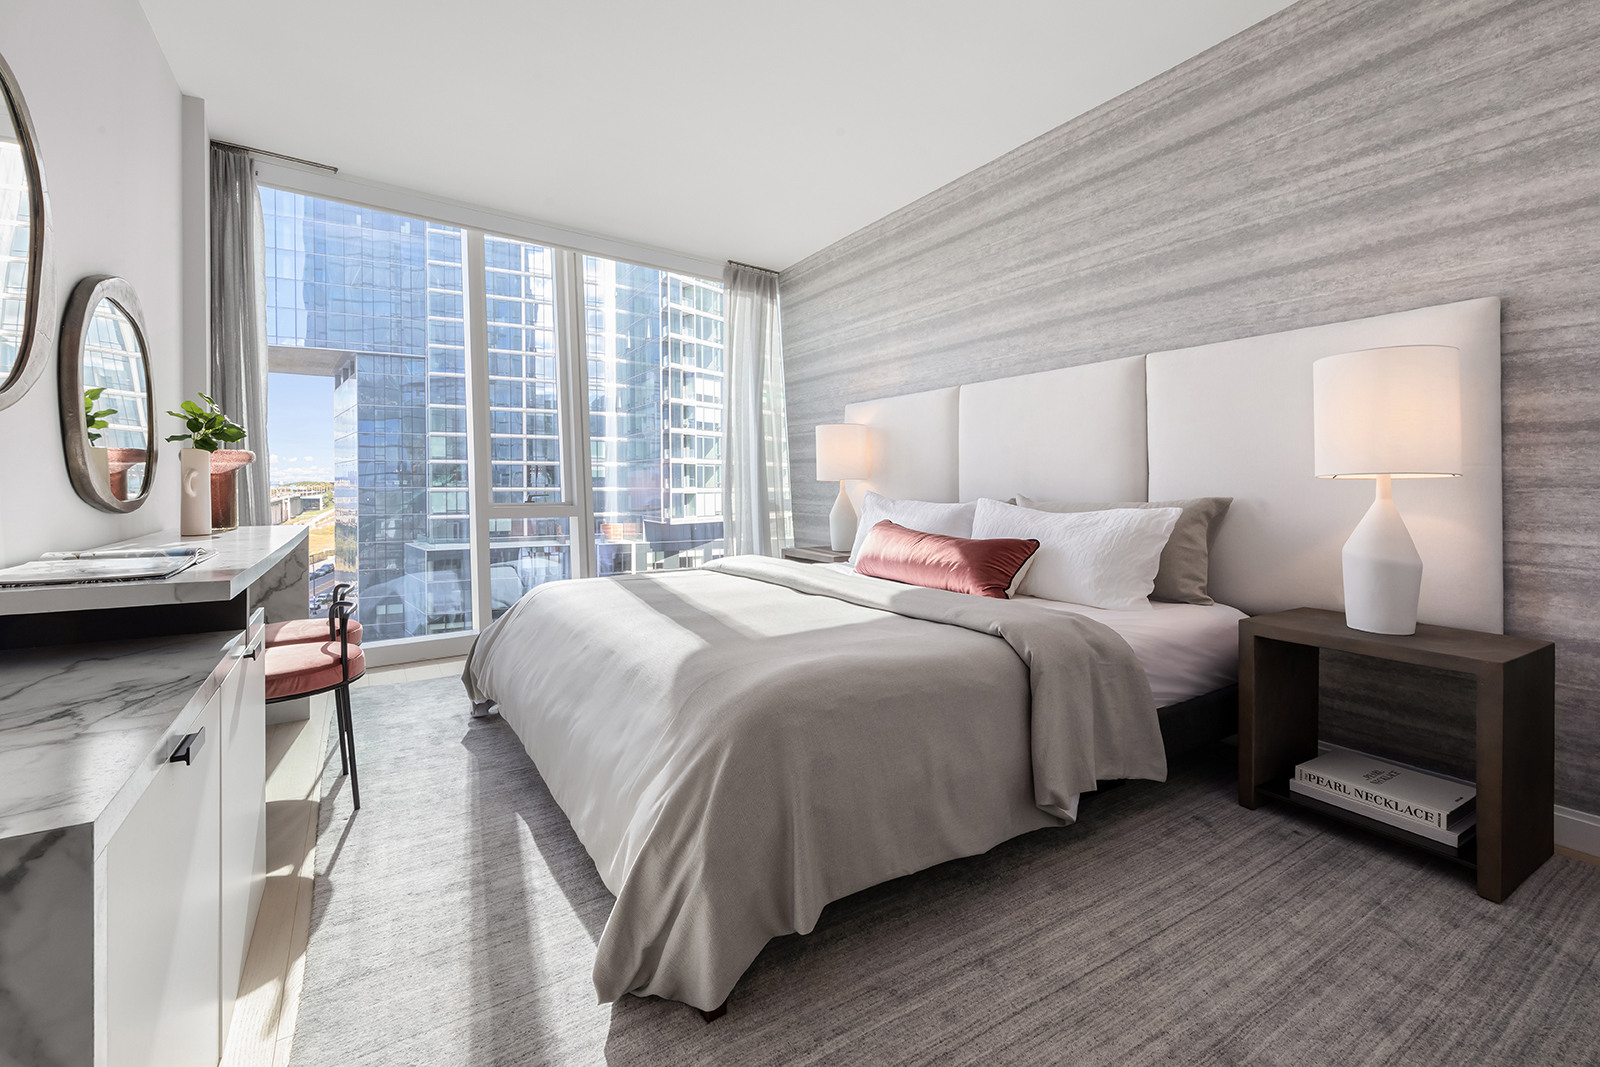 Modern and bright hotel room with a large bed, city view, and elegant furnishings.